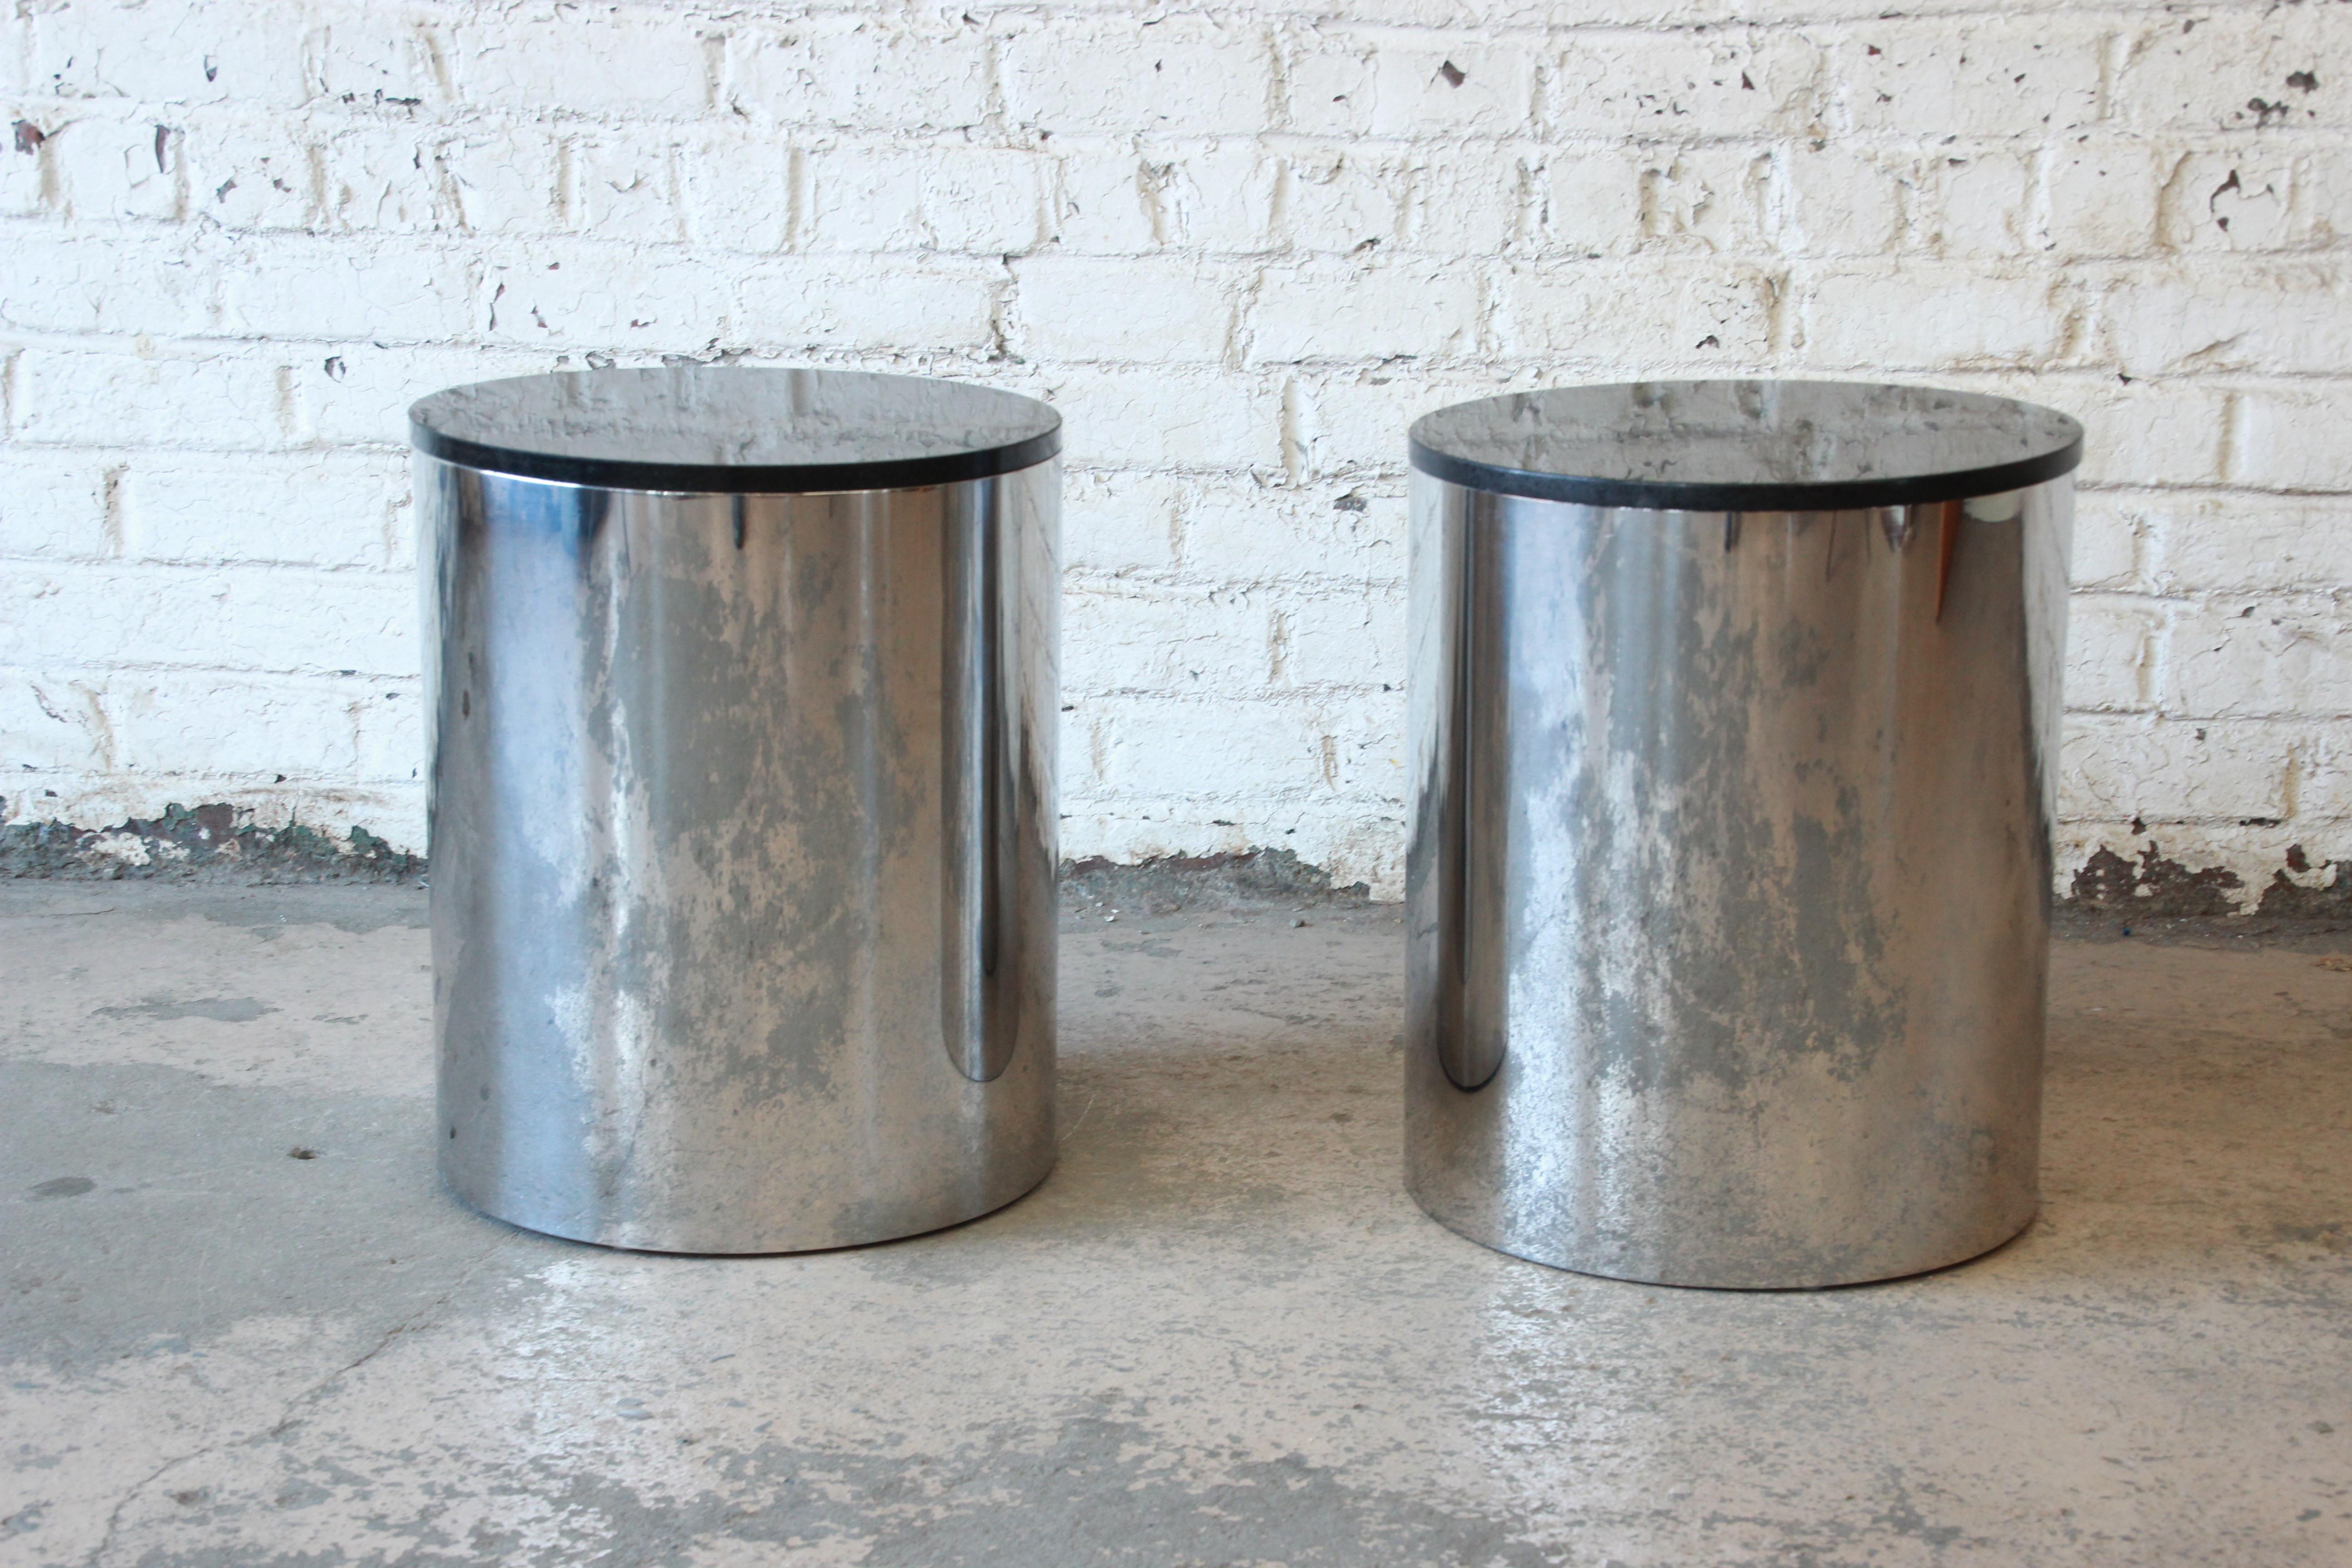 A nice pair of Mid-Century Modern polished aluminum and black granite top drum side tables or plant stands by Paul Mayen for Habitat. The tables are in very good original condition, with minimal wear from age and use. A perfect addition to any